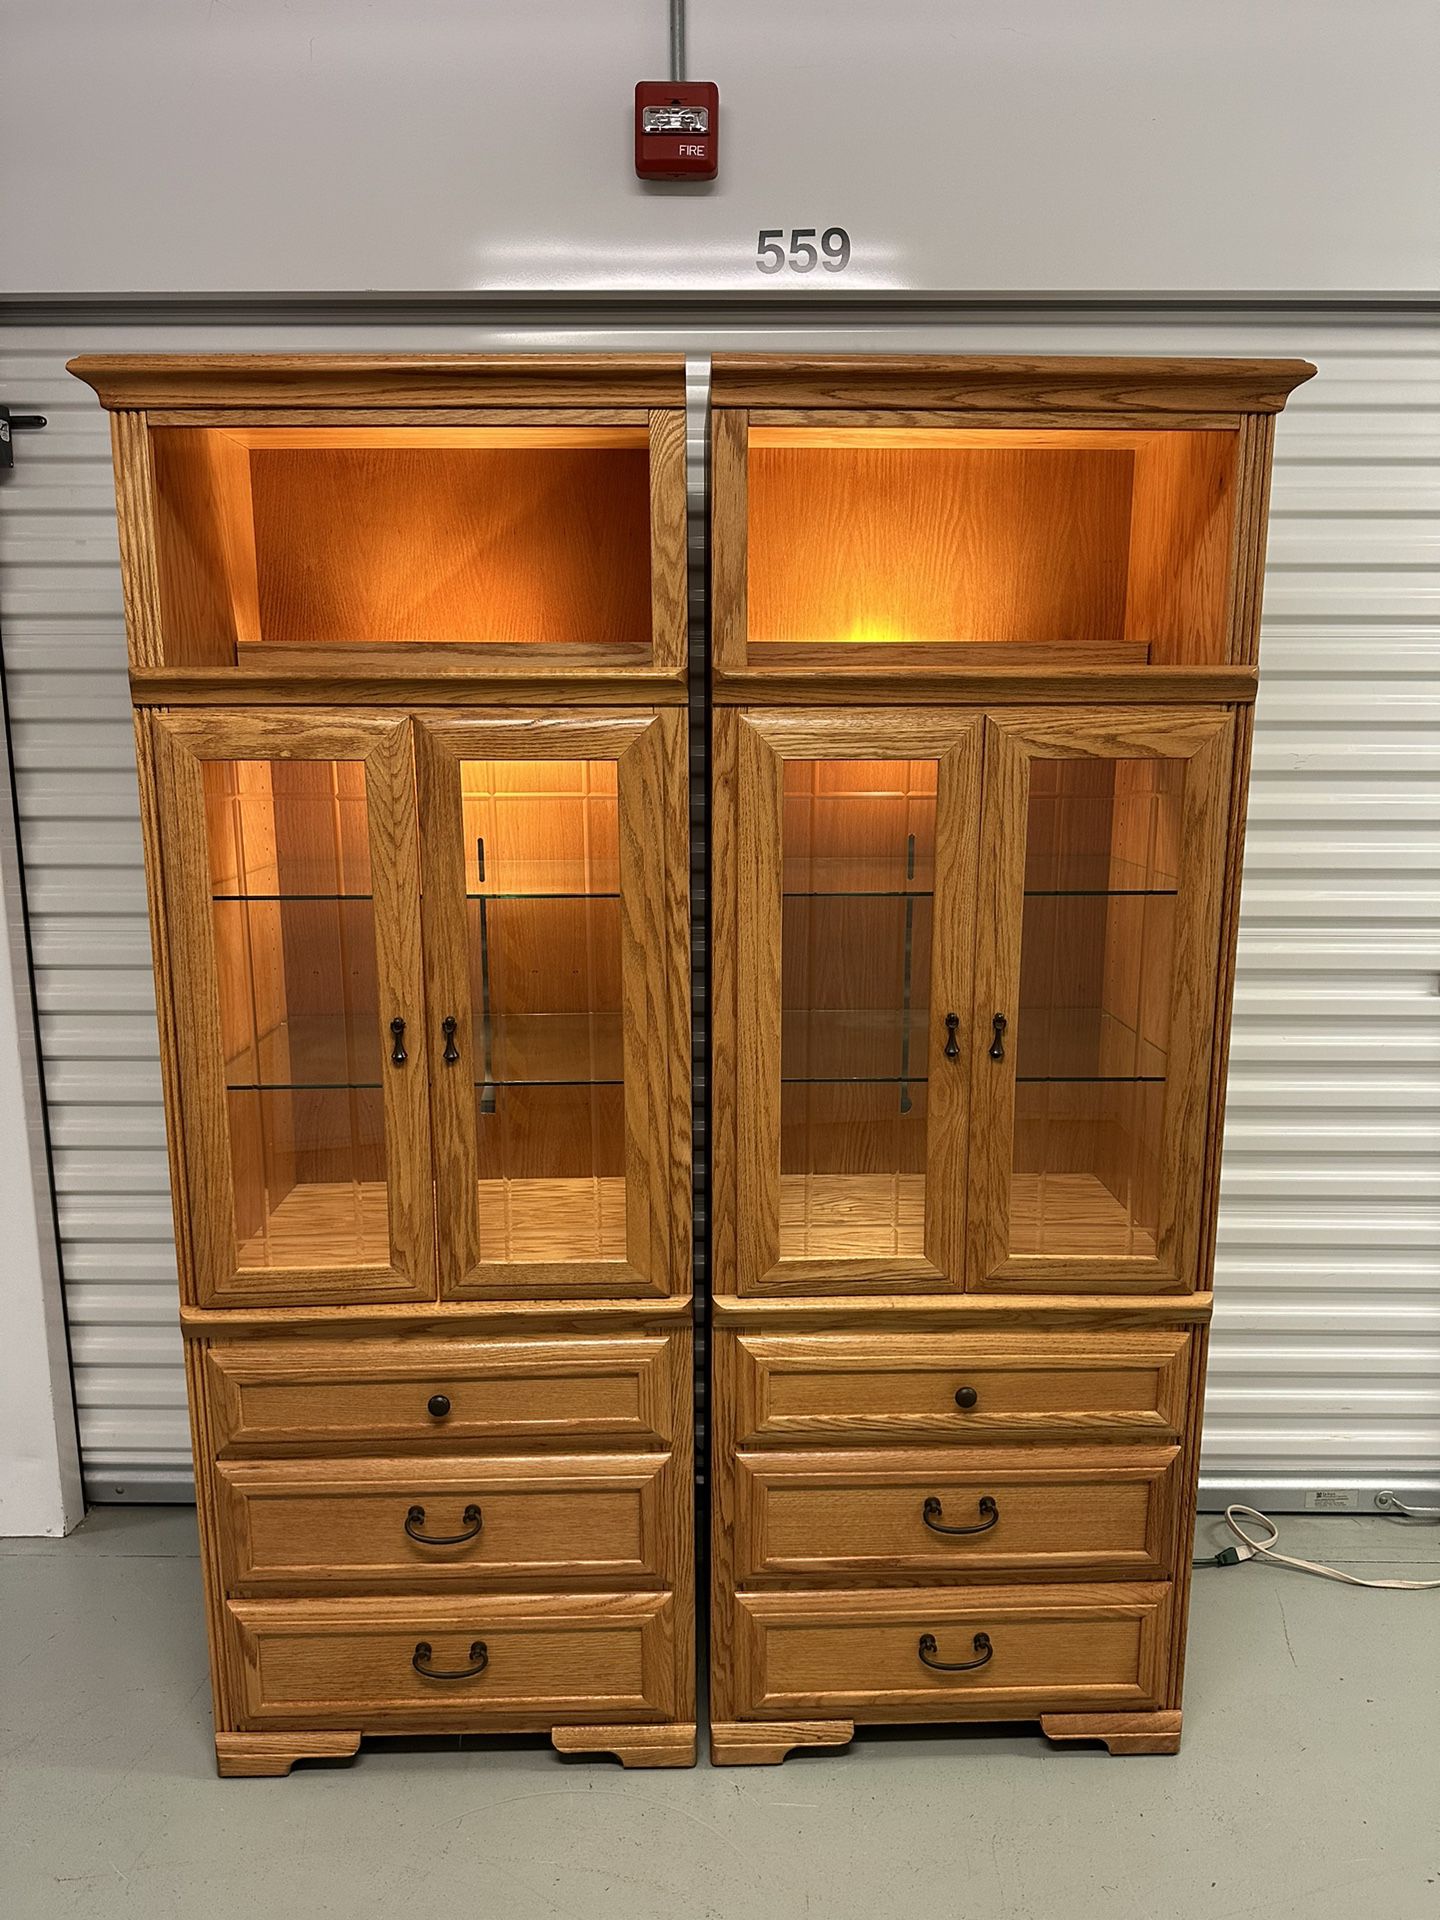 Set of 2 Lighted Display Curio Cabinets w/ Adjustable Shelves